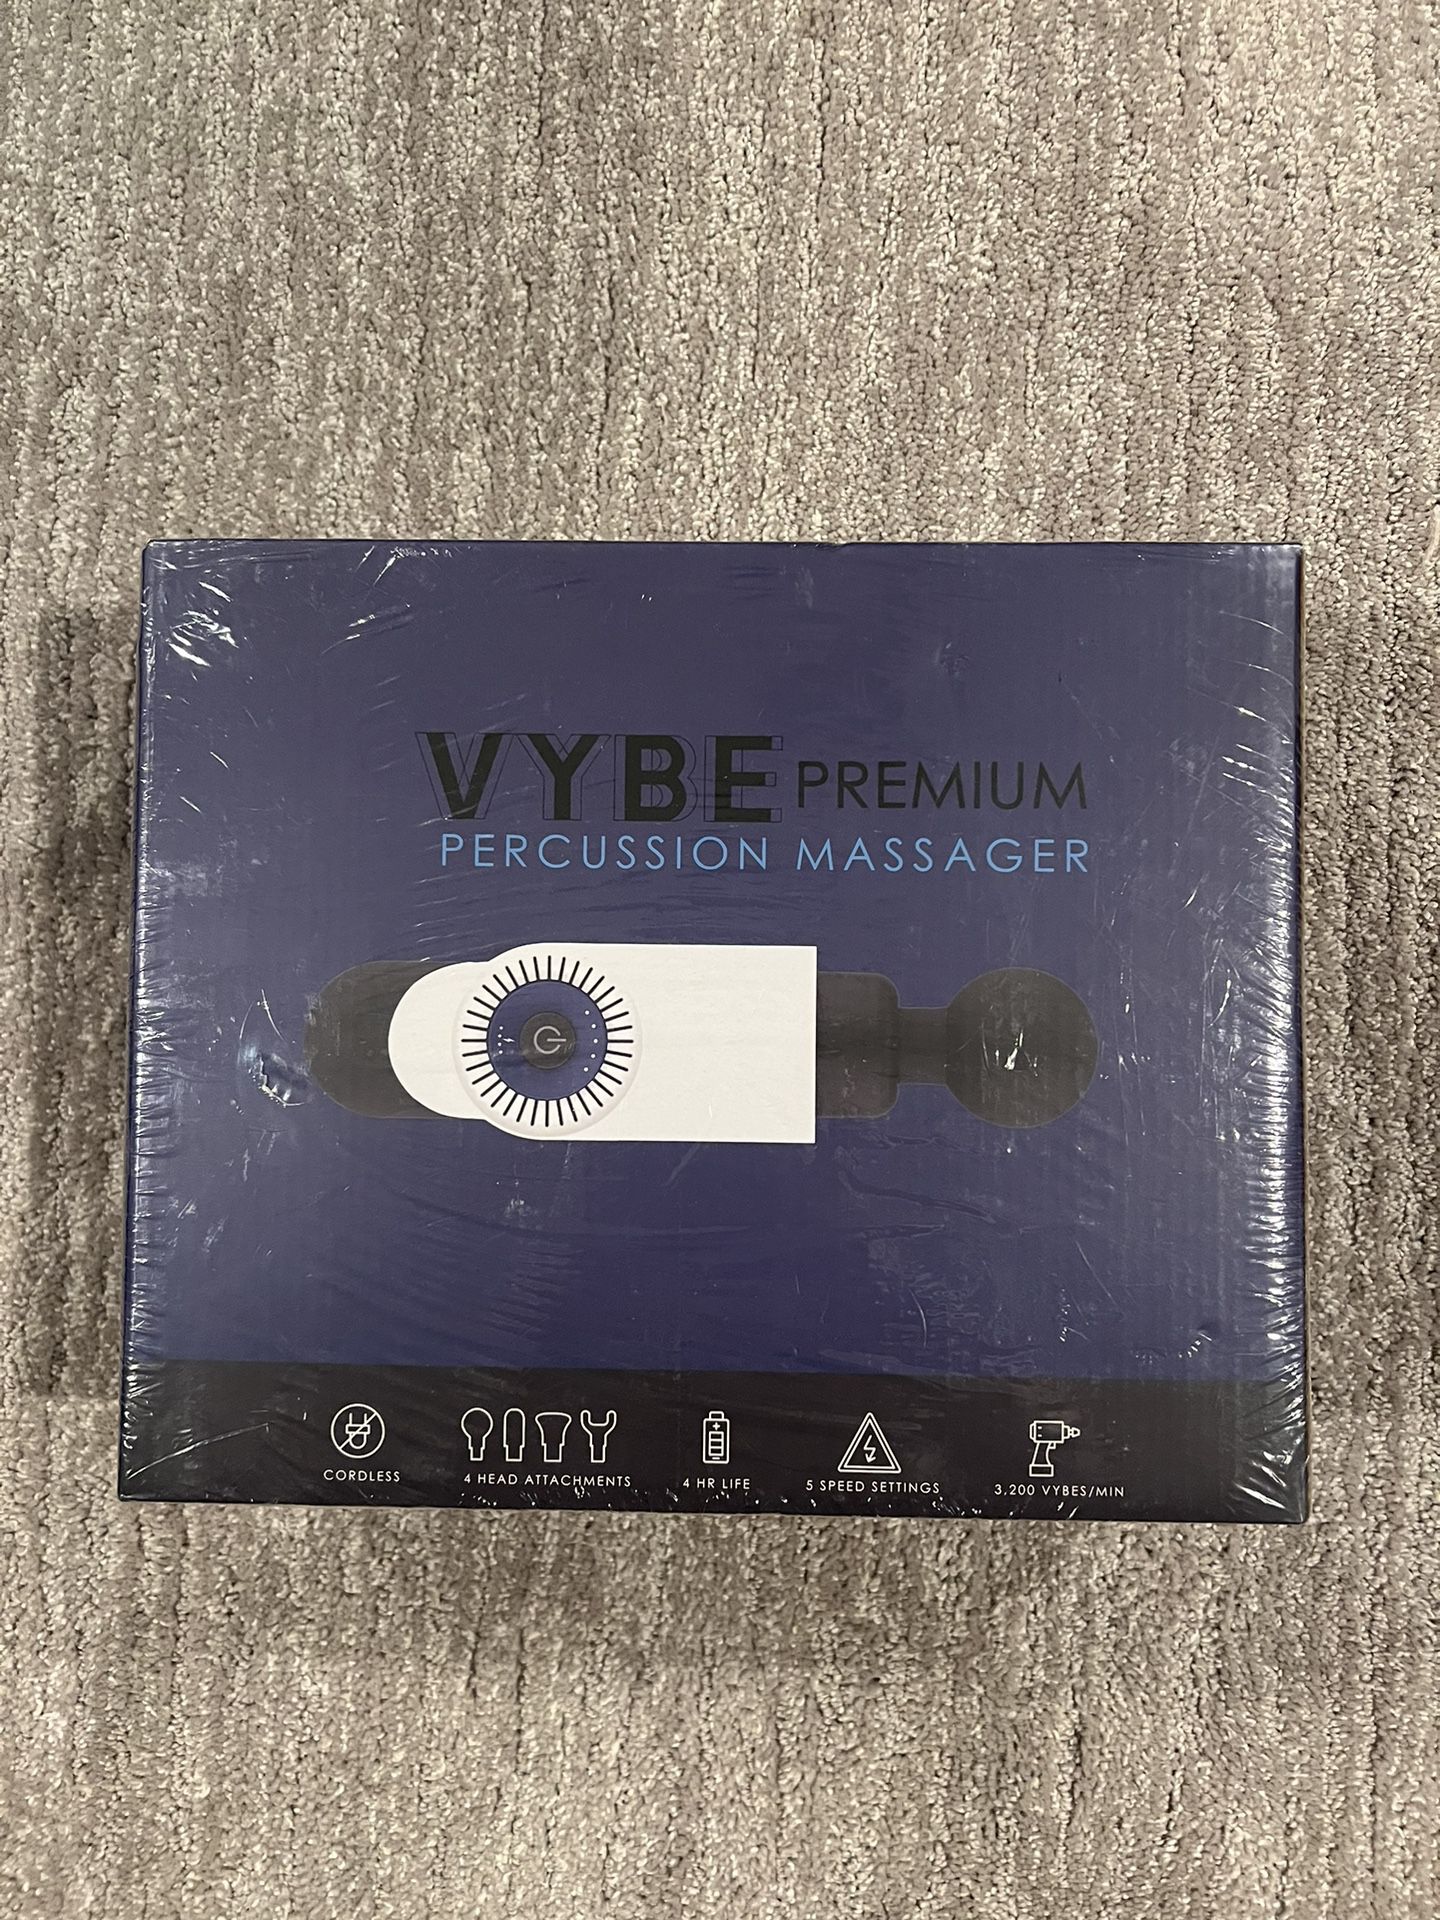 Vybe Premium Percussion Massager (Brand New)